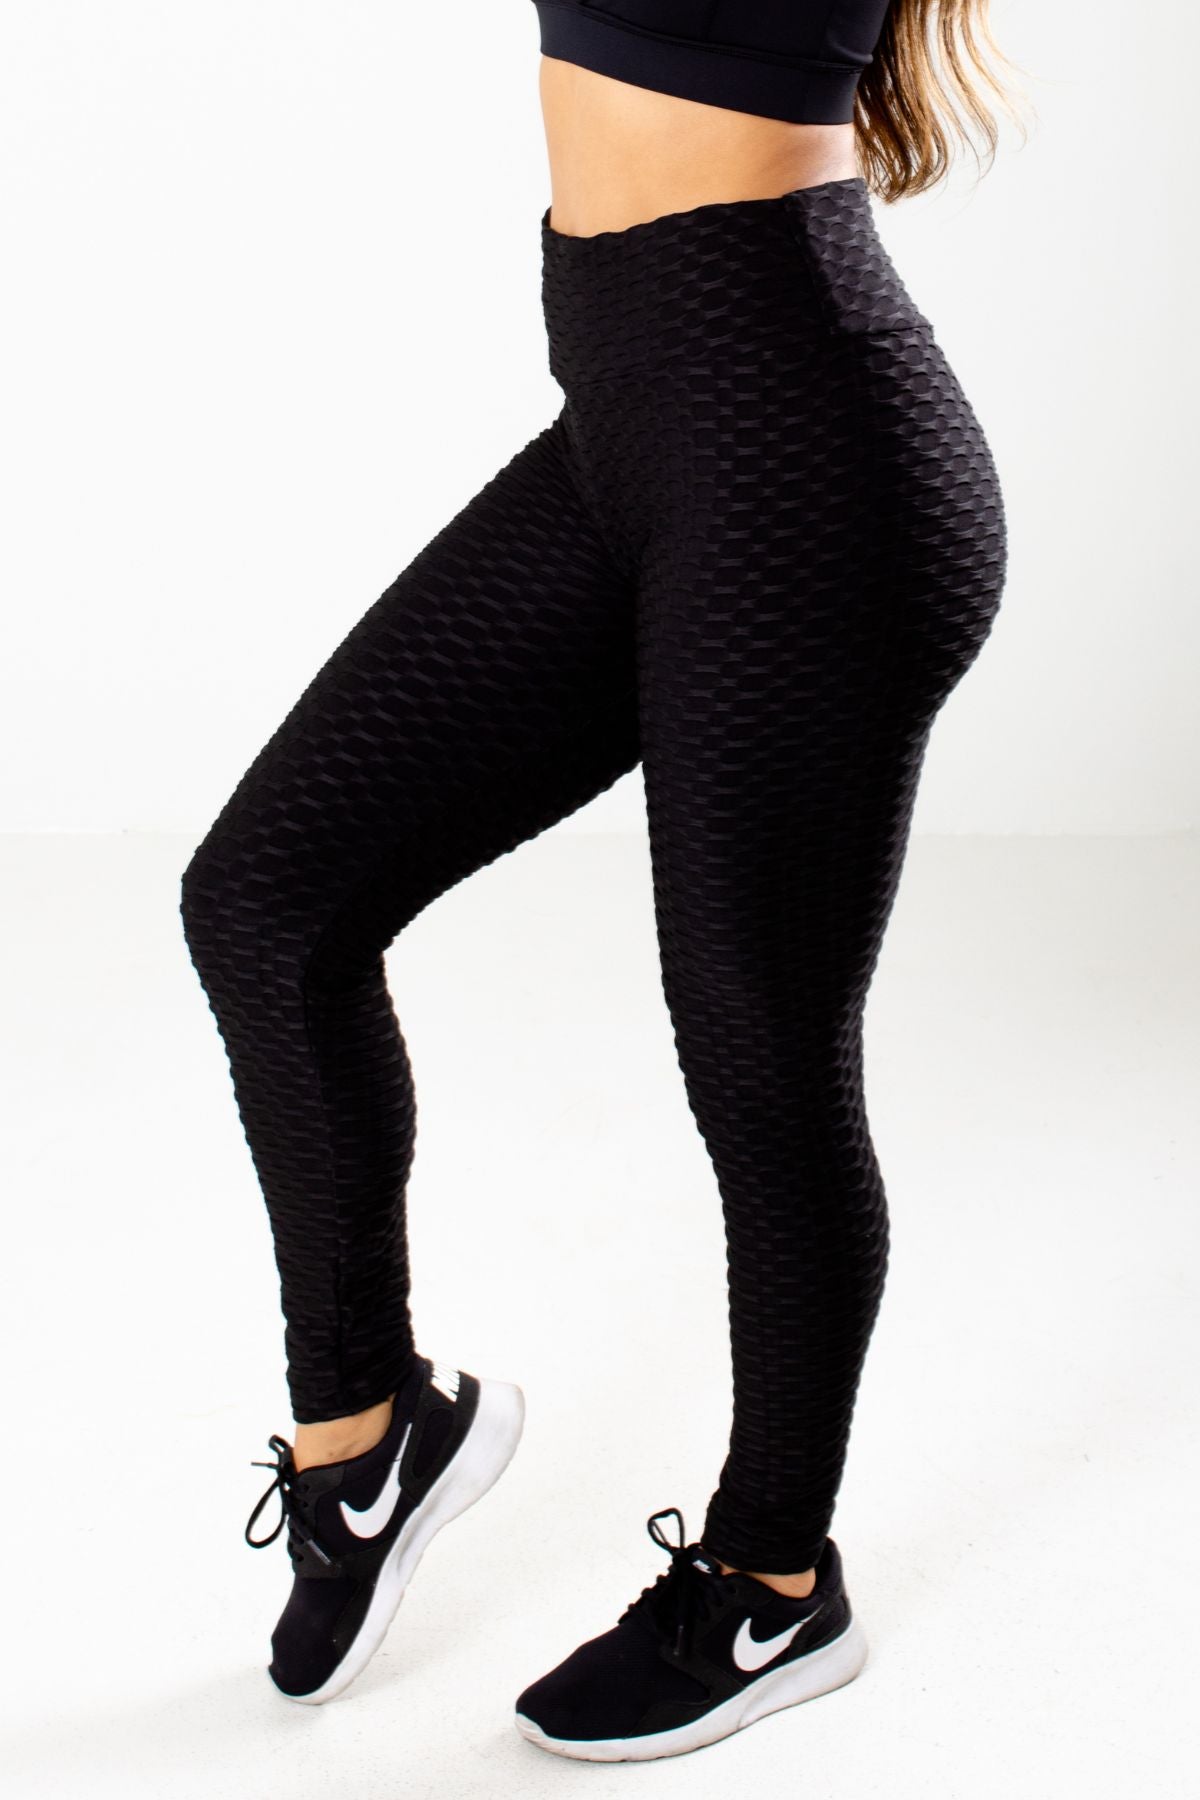 Black Cute and Comfortable Boutique Activewear Leggings for Women